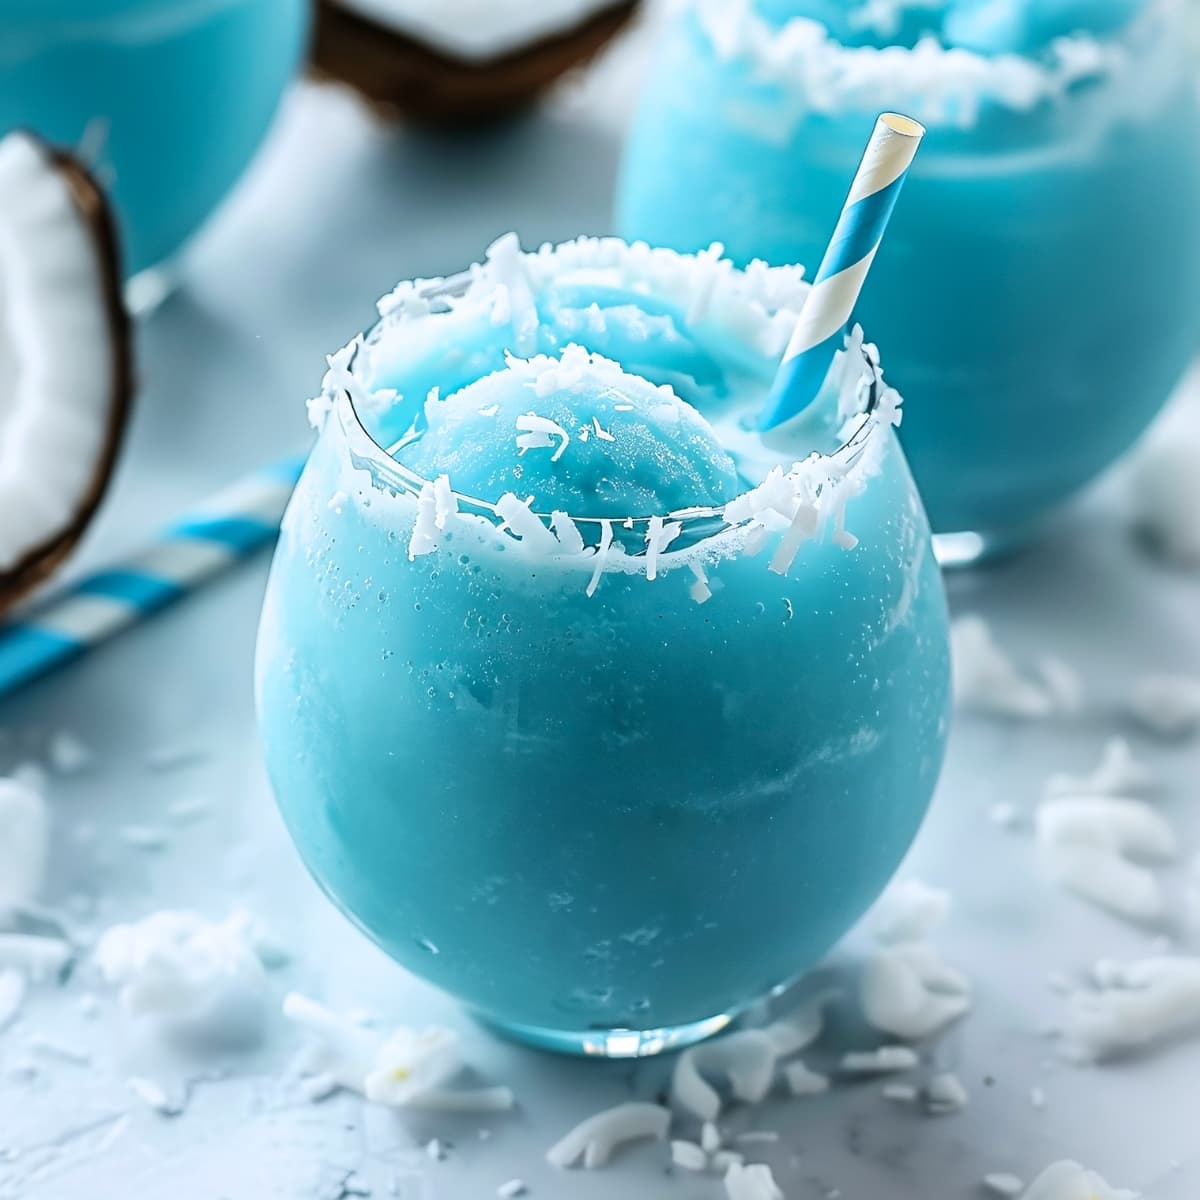 Homemade Jack Frost cocktail in a glass with a rim of shredded coconut